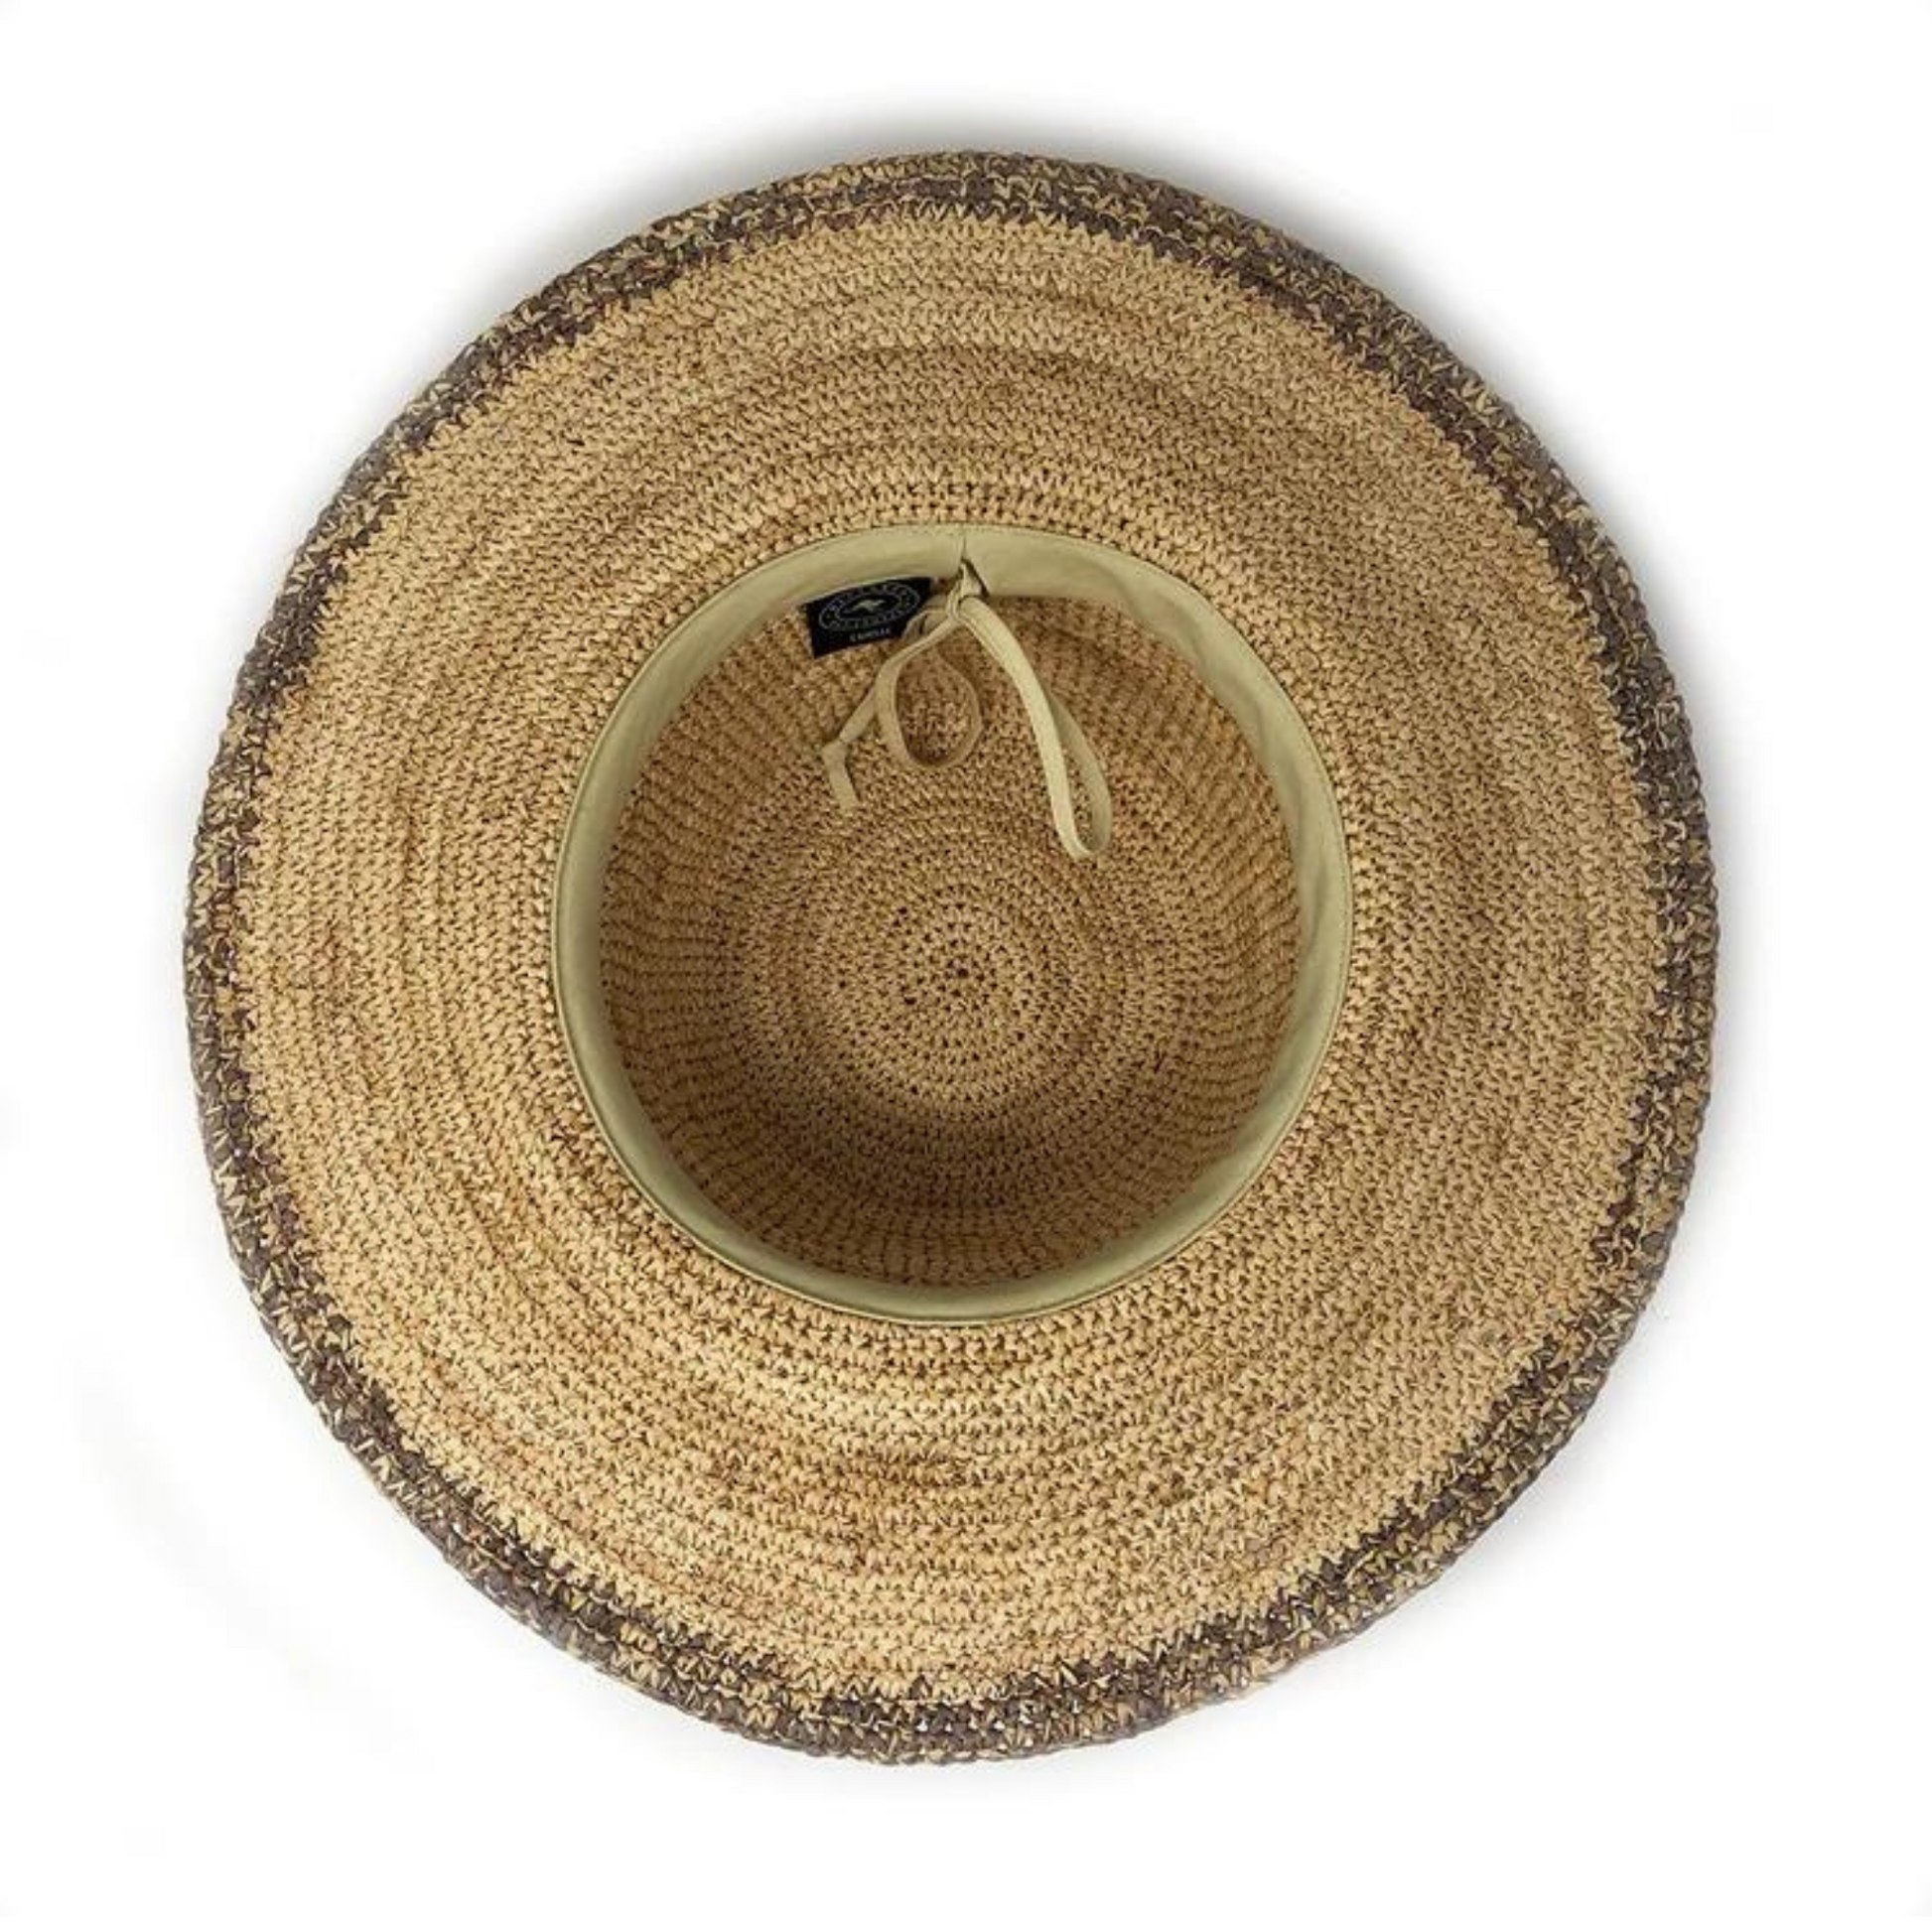 The underneath of a hat is pictured with ombré warm grey brim on edge to natural tan weave. The inner of the crown has a band of tan fabric that cases an adjustable string.